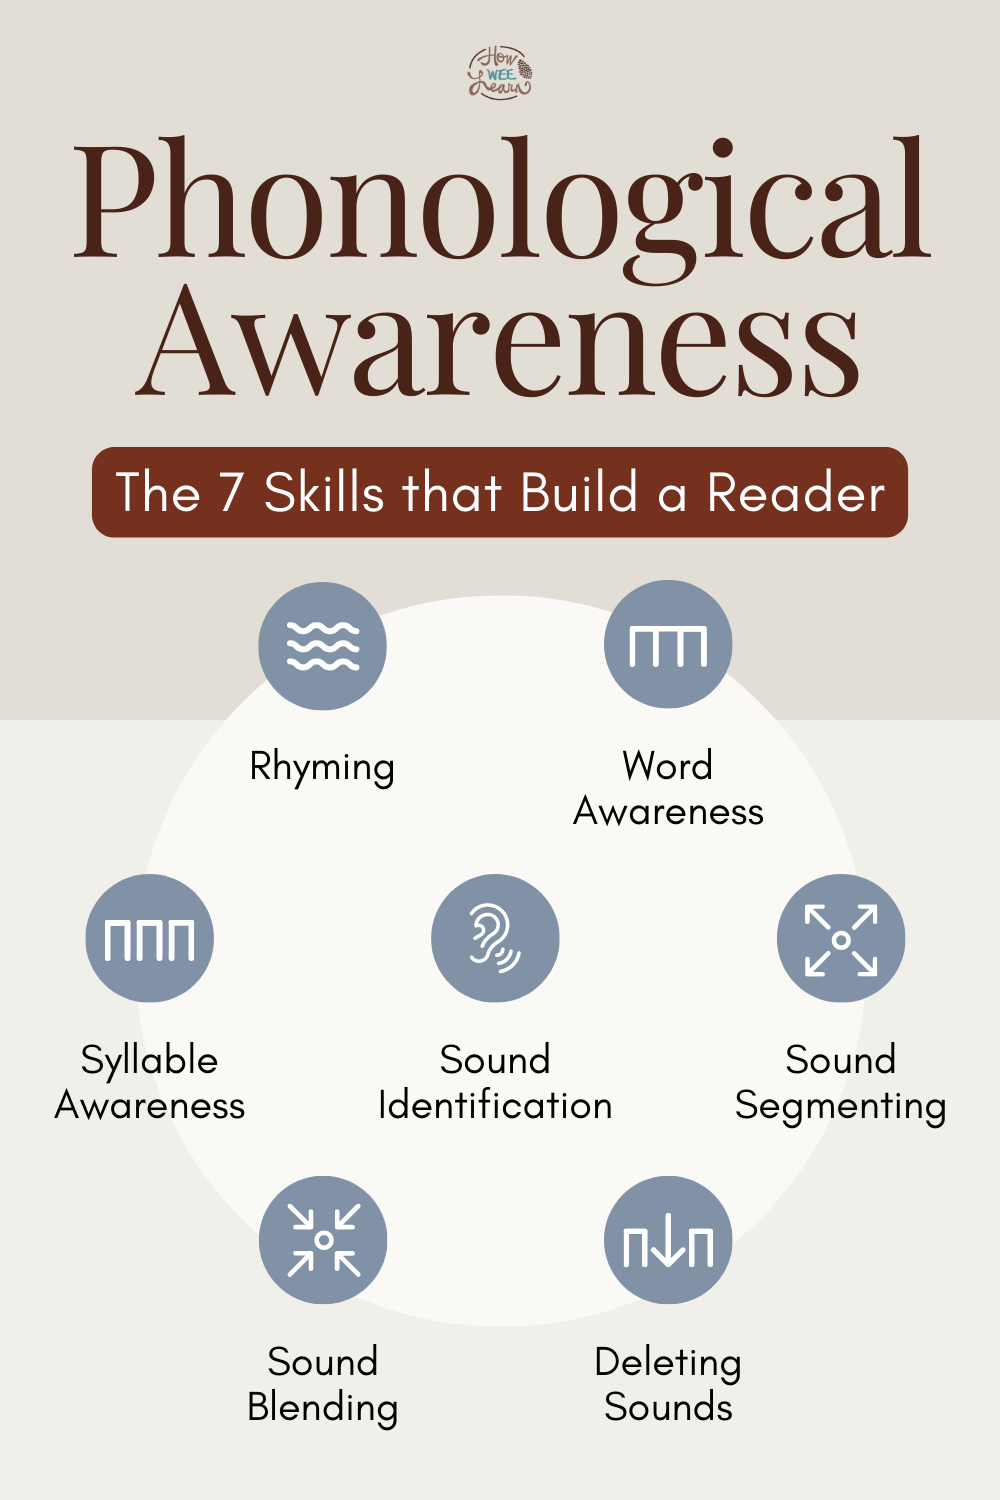 Phonological Awareness: The 7 Skills that Build a Reader